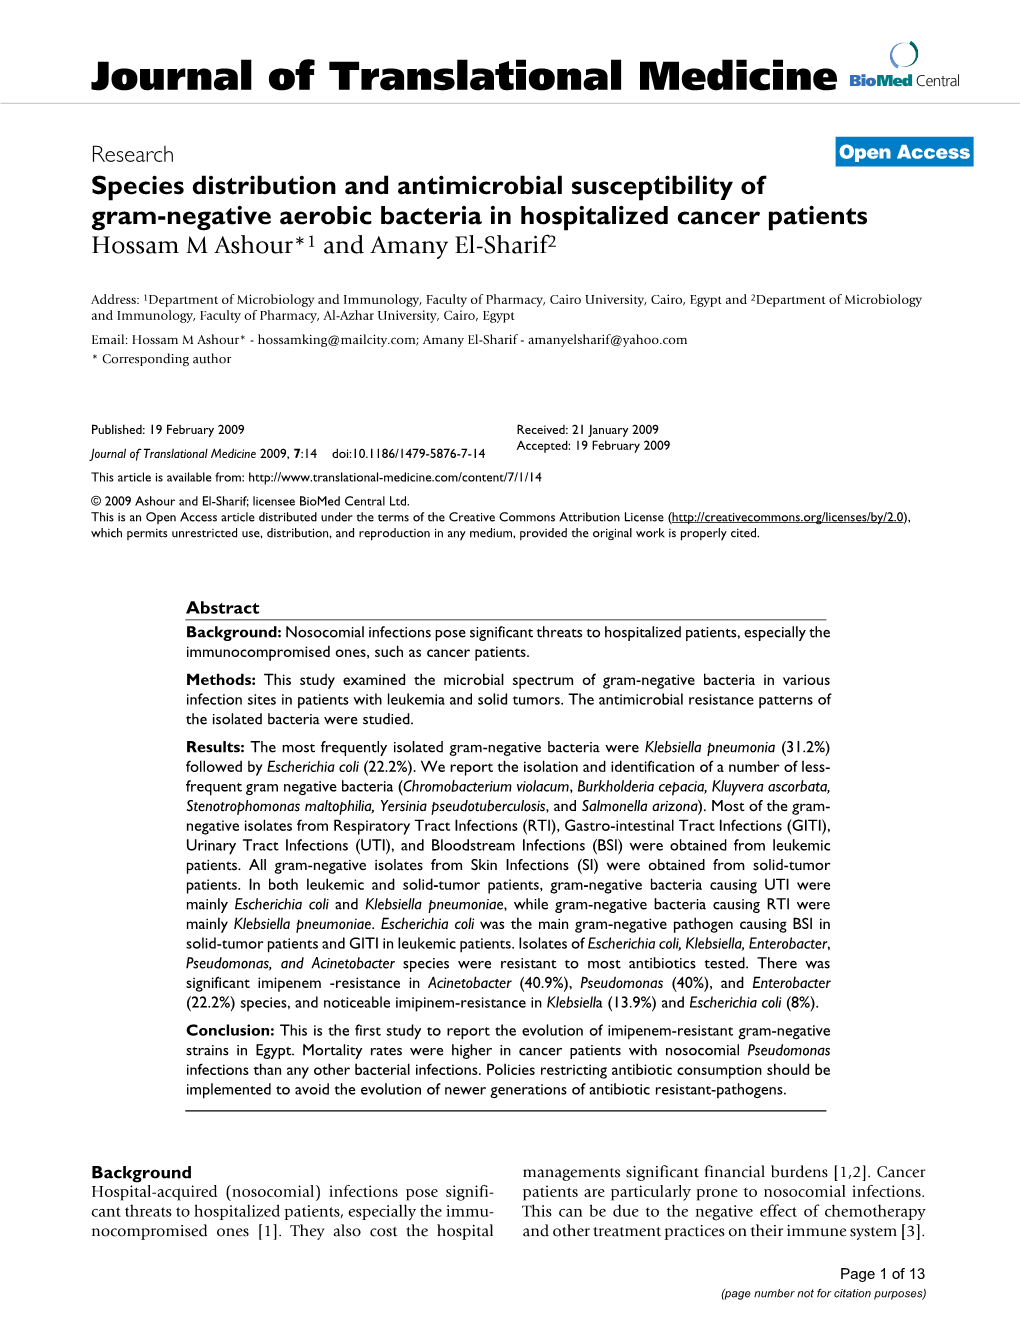 Species Distribution and Antimicrobial Susceptibility of Gram-Negative Aerobic Bacteria in Hospitalized Cancer Patients Hossam M Ashour*1 and Amany El-Sharif2